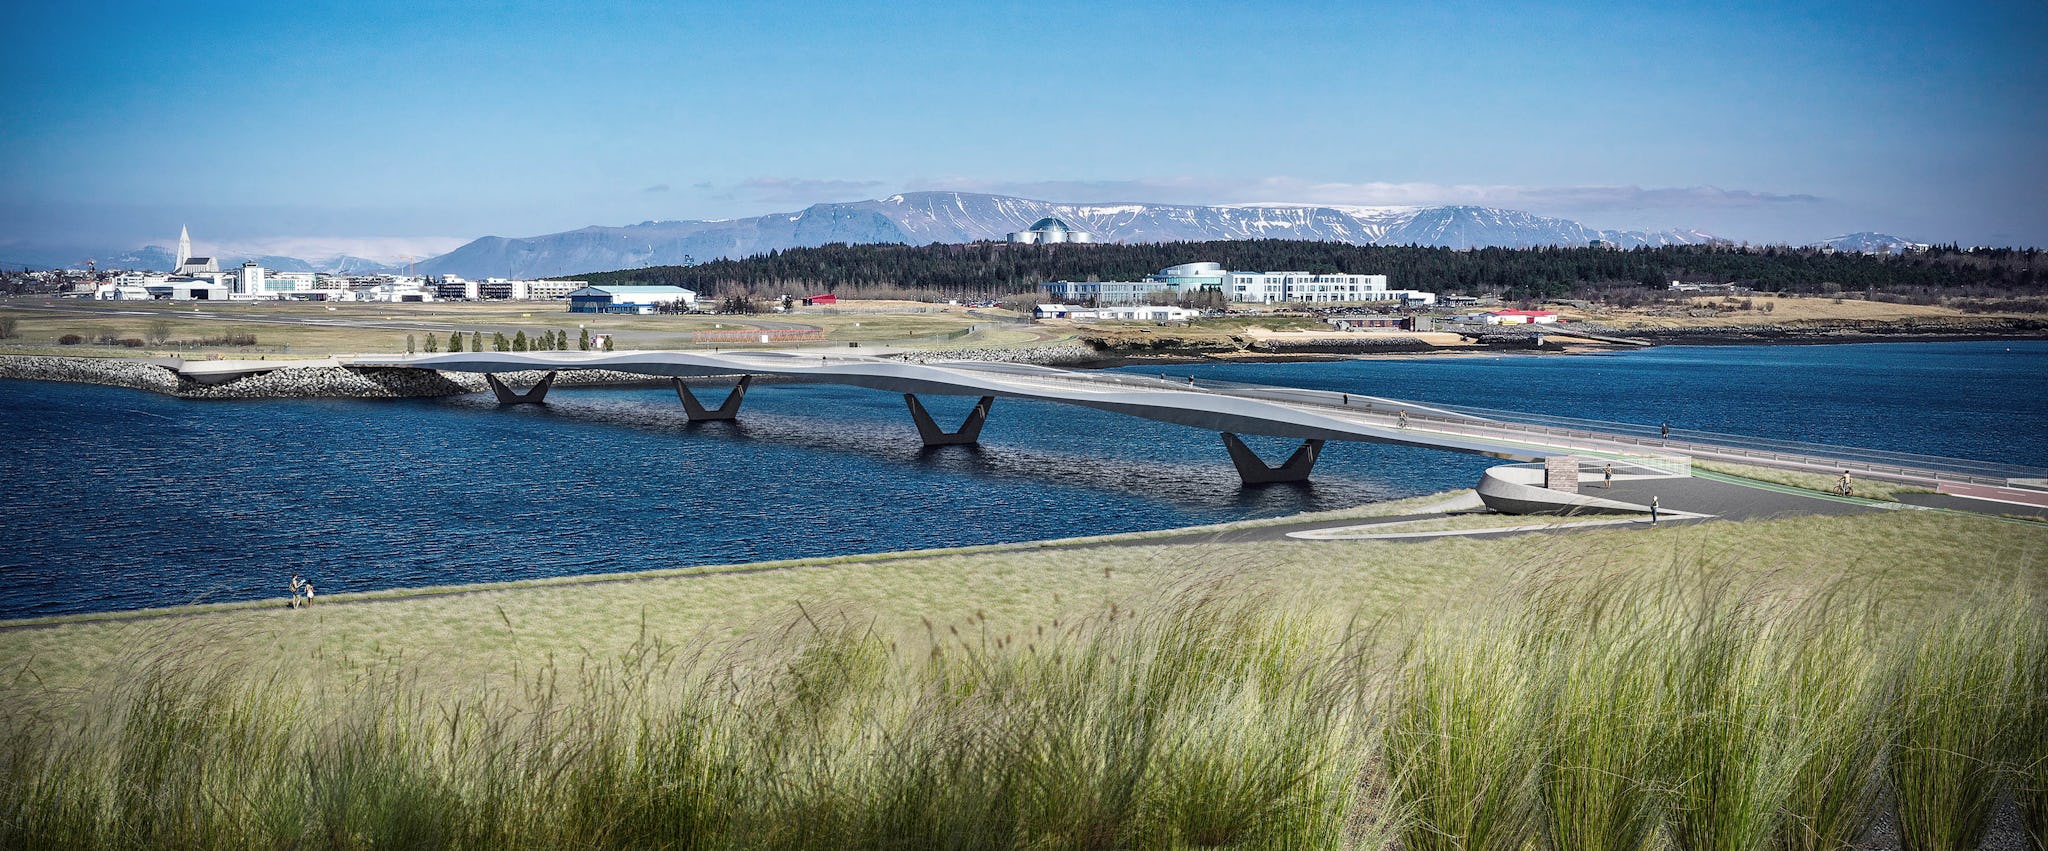 Alda; a bridge over the ocean, Reykjavík city in the background and mountains even further a way